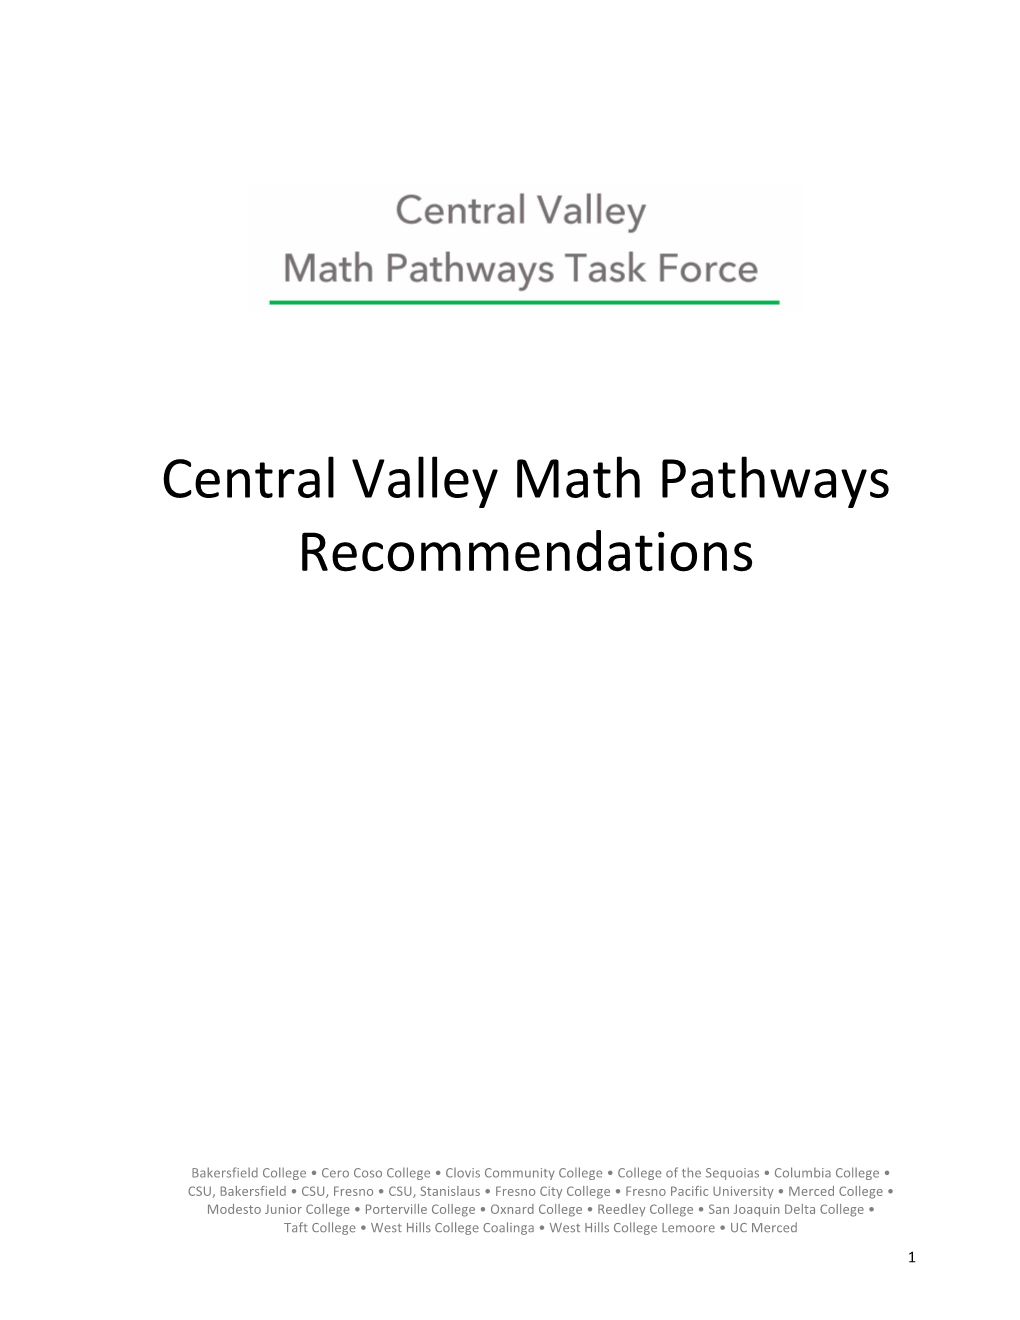 Central Valley Math Pathways Recommendations